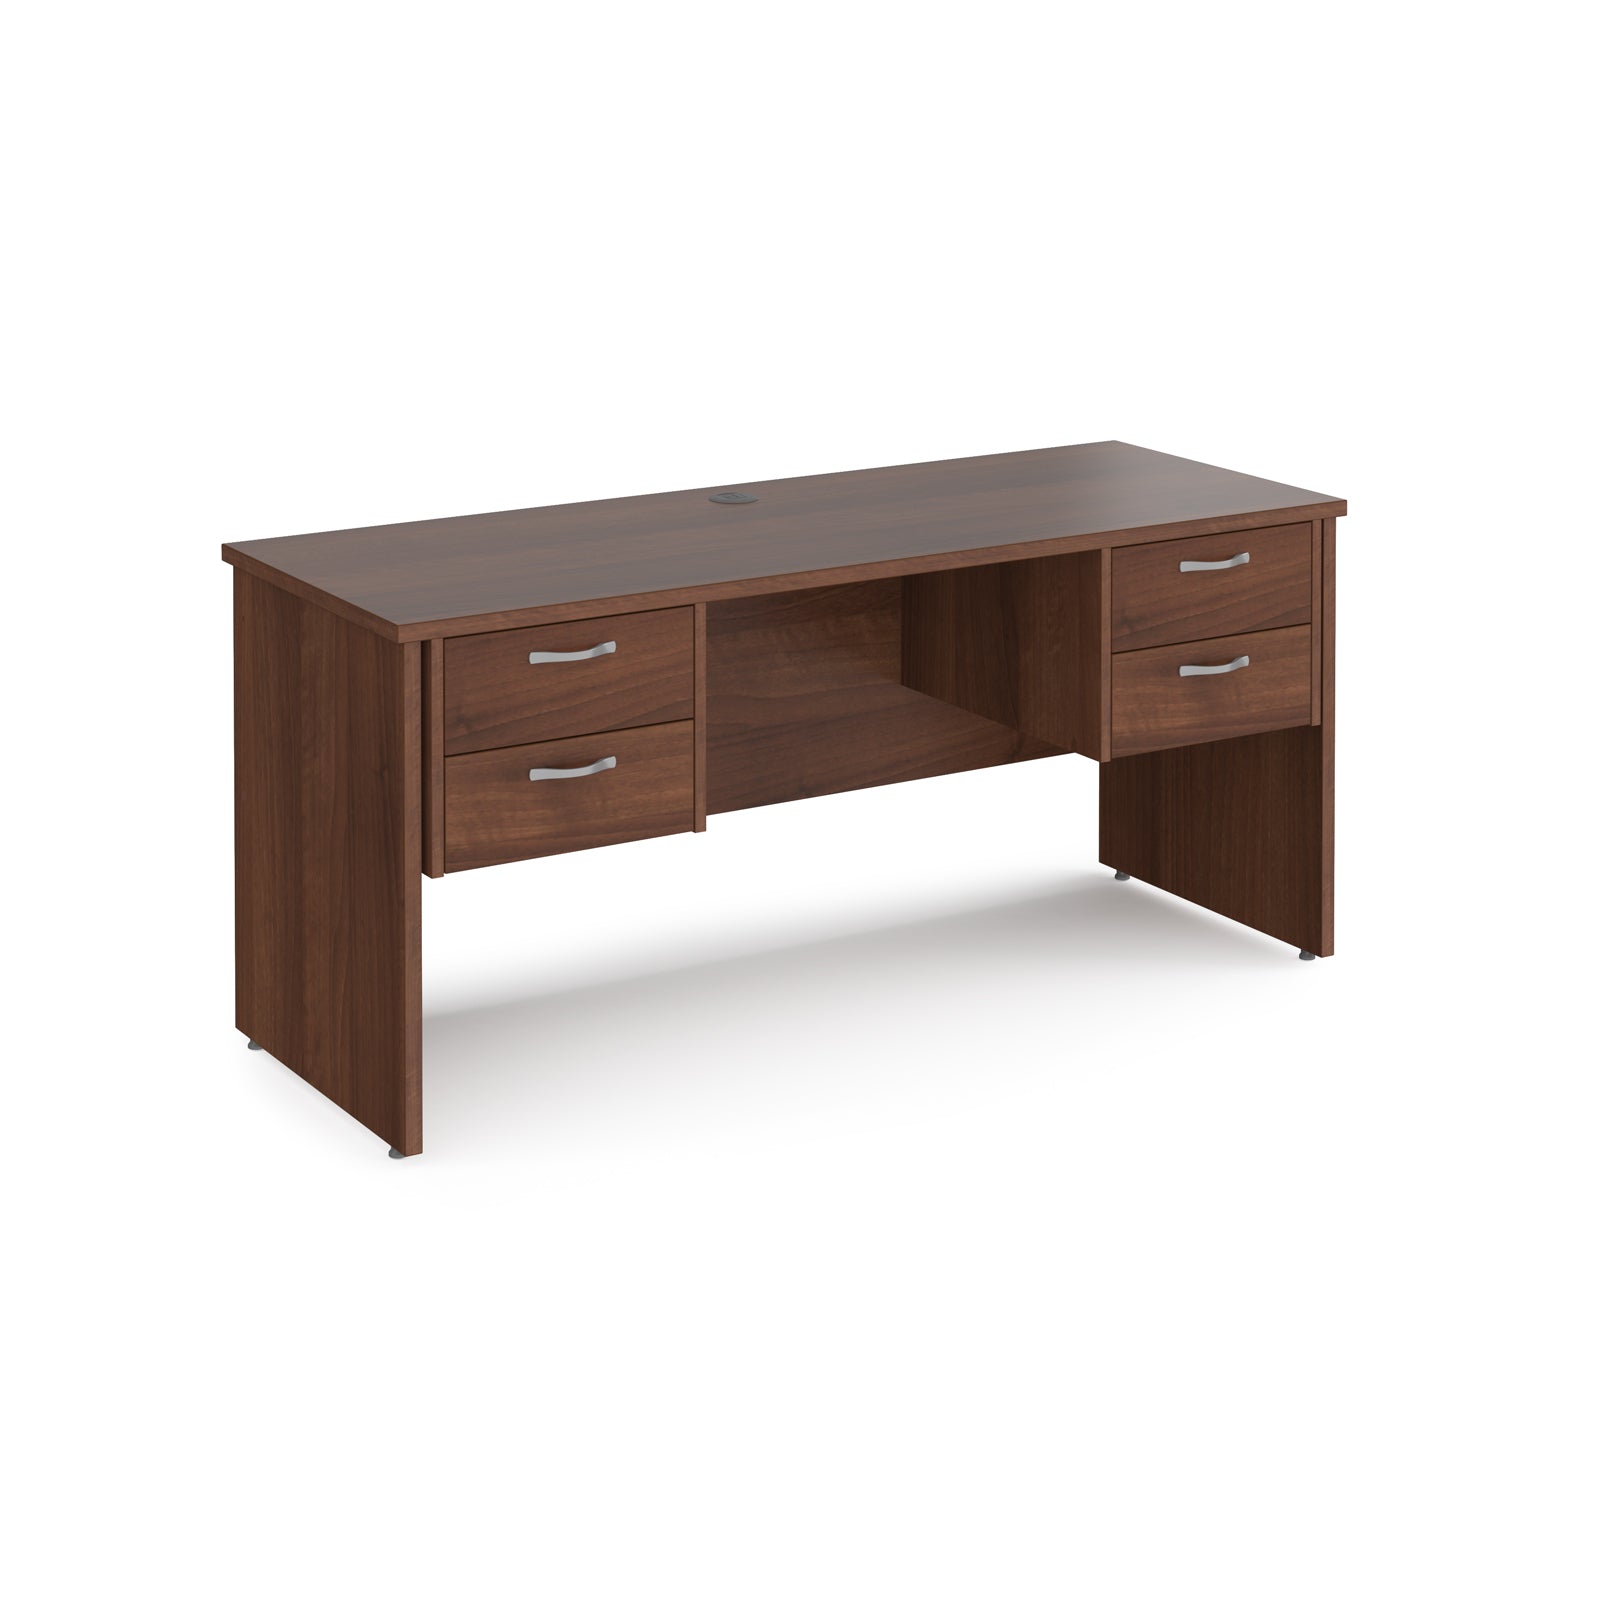 Maestro 600mm Deep Straight Panel Leg Office Desk with Two and Two Drawer Pedestal